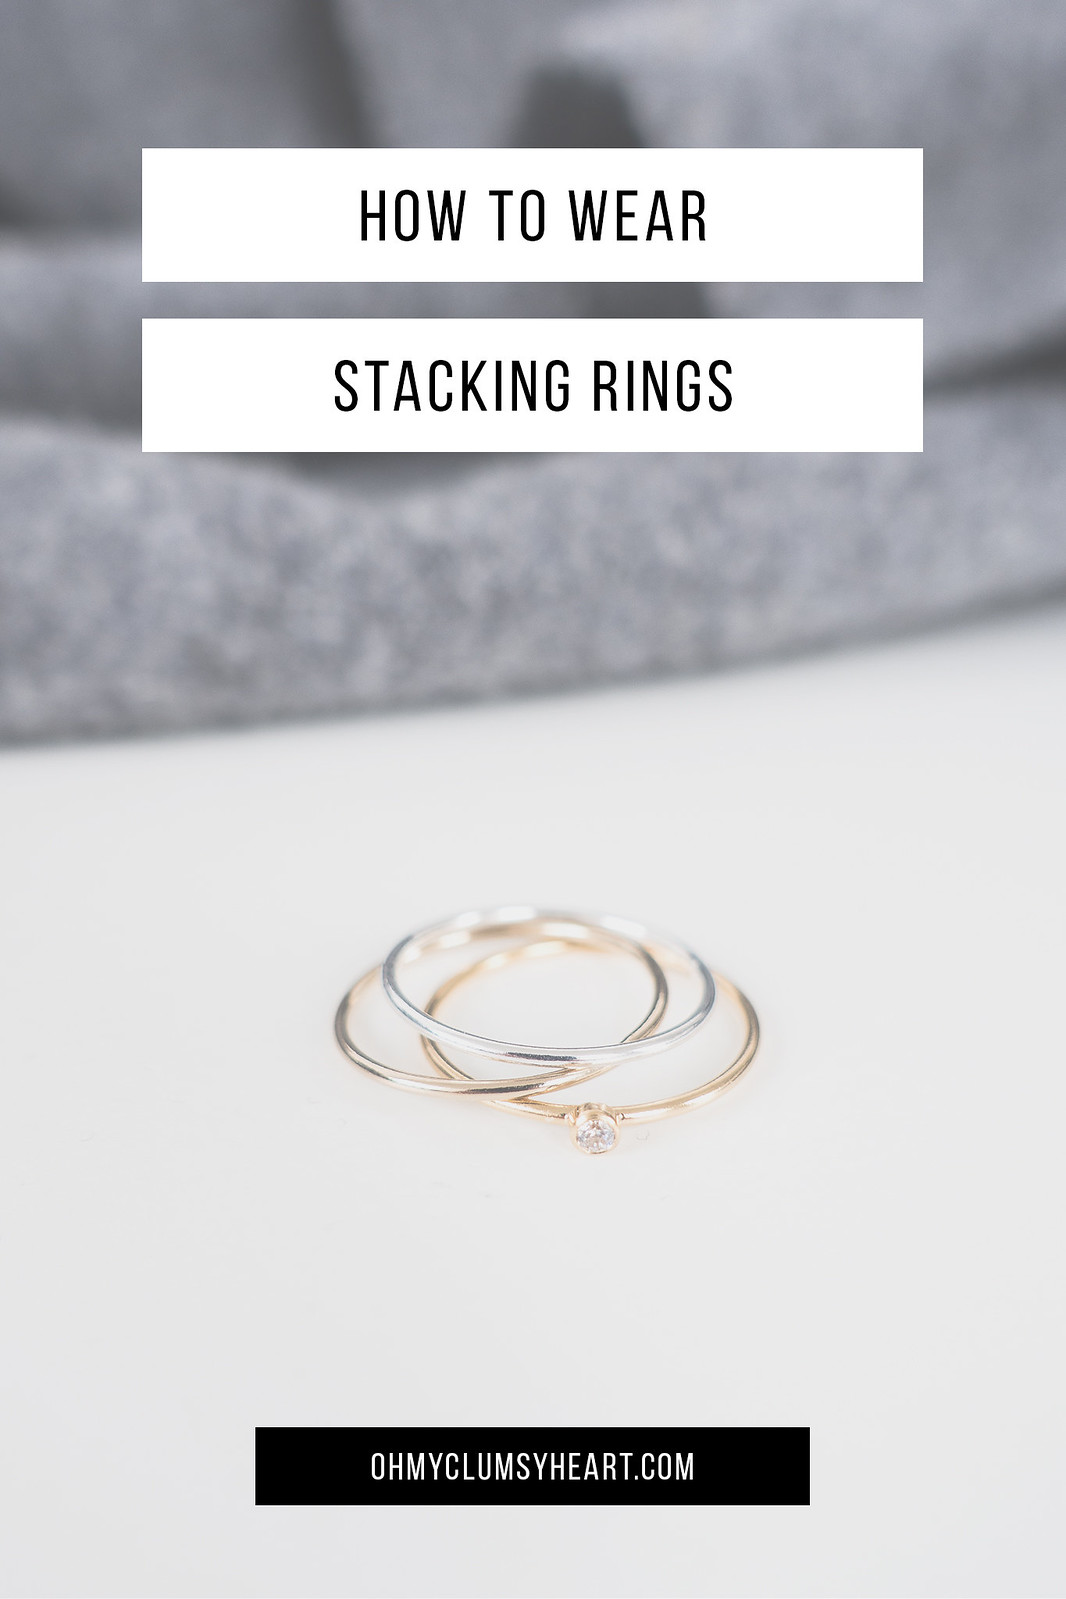 How To Wear Stacking Rings